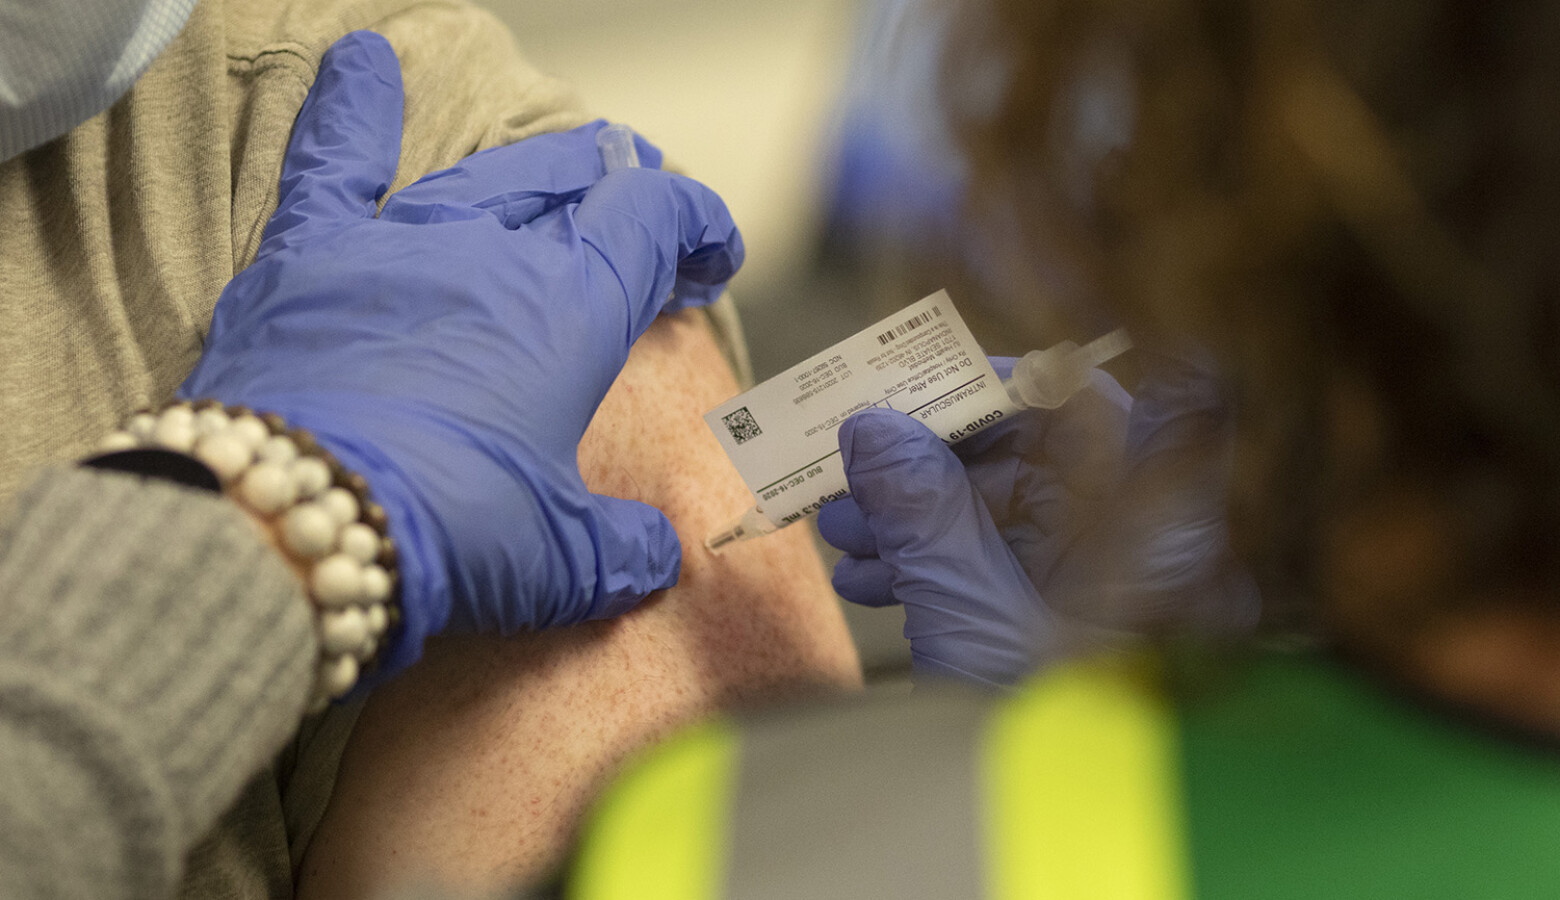 Some schools have been able to coordinate initial COVID-19 vaccines for their teachers, as local health officials work to roll out initial doses to health workers and long-term care residents across the state. (Provided by Indiana University Health)